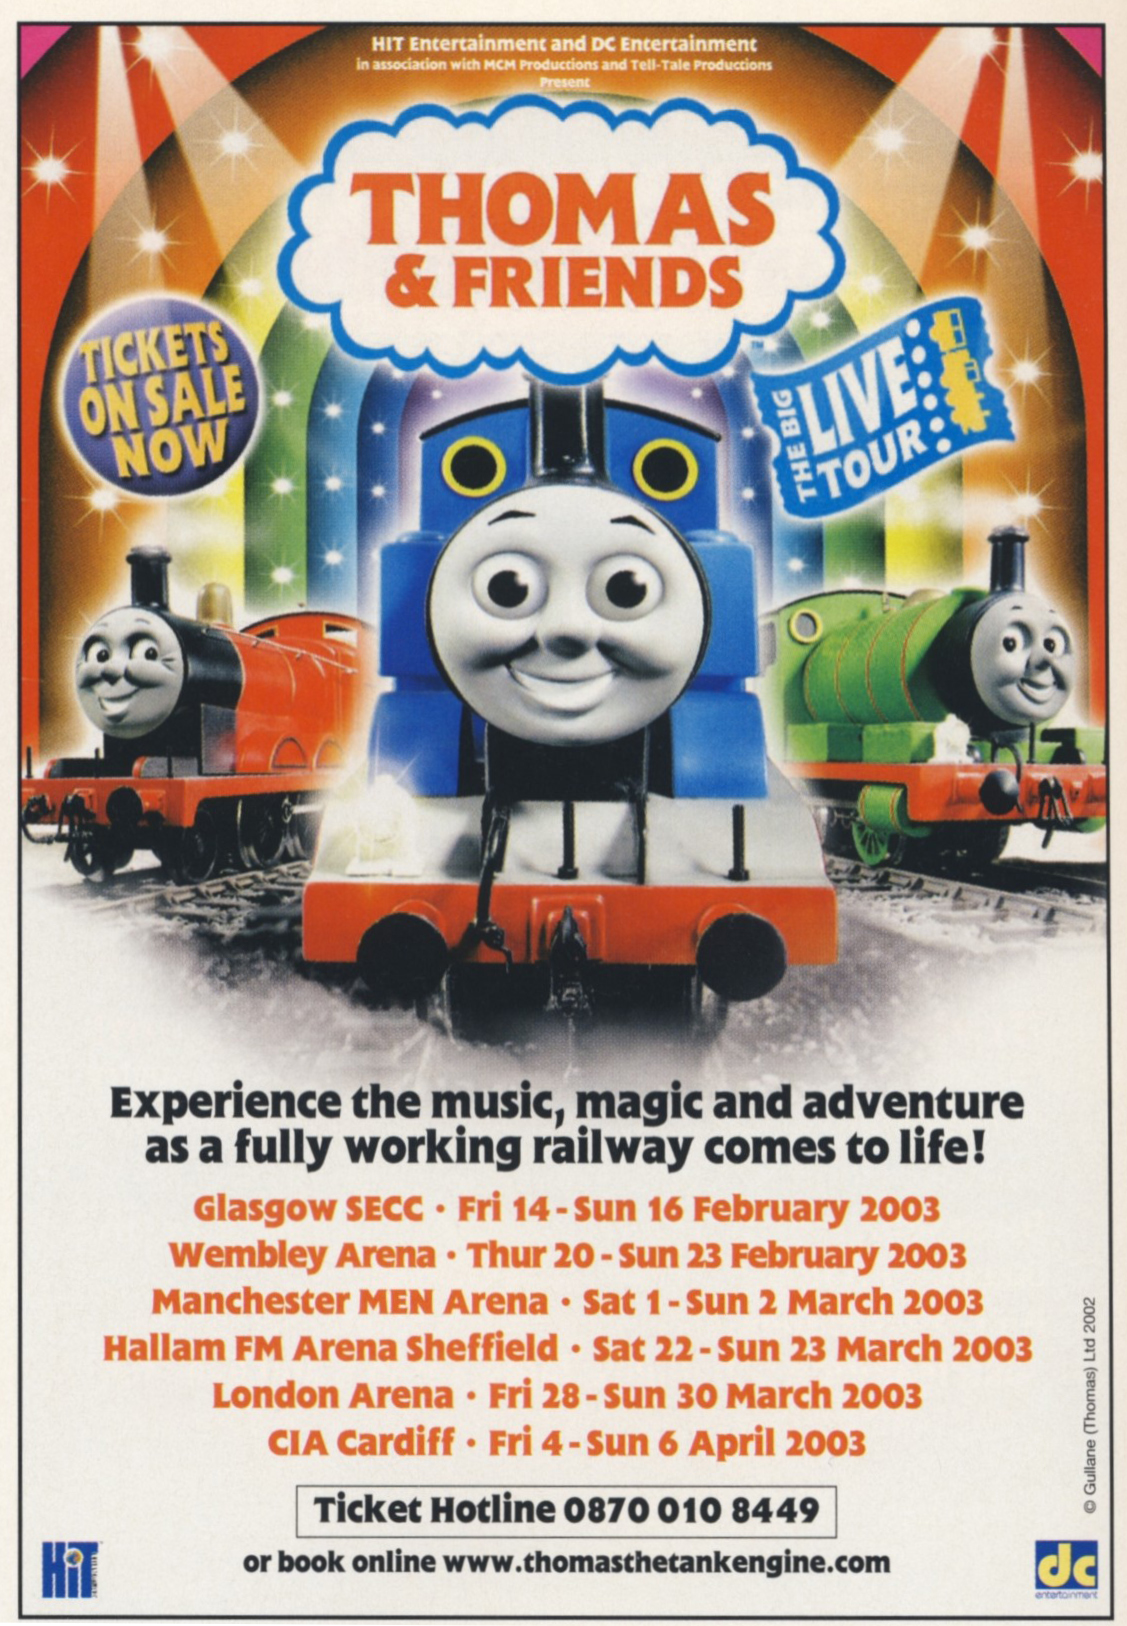 Thomas & Friends The Big & All Aboard Live Tours/Gallery Thomas the